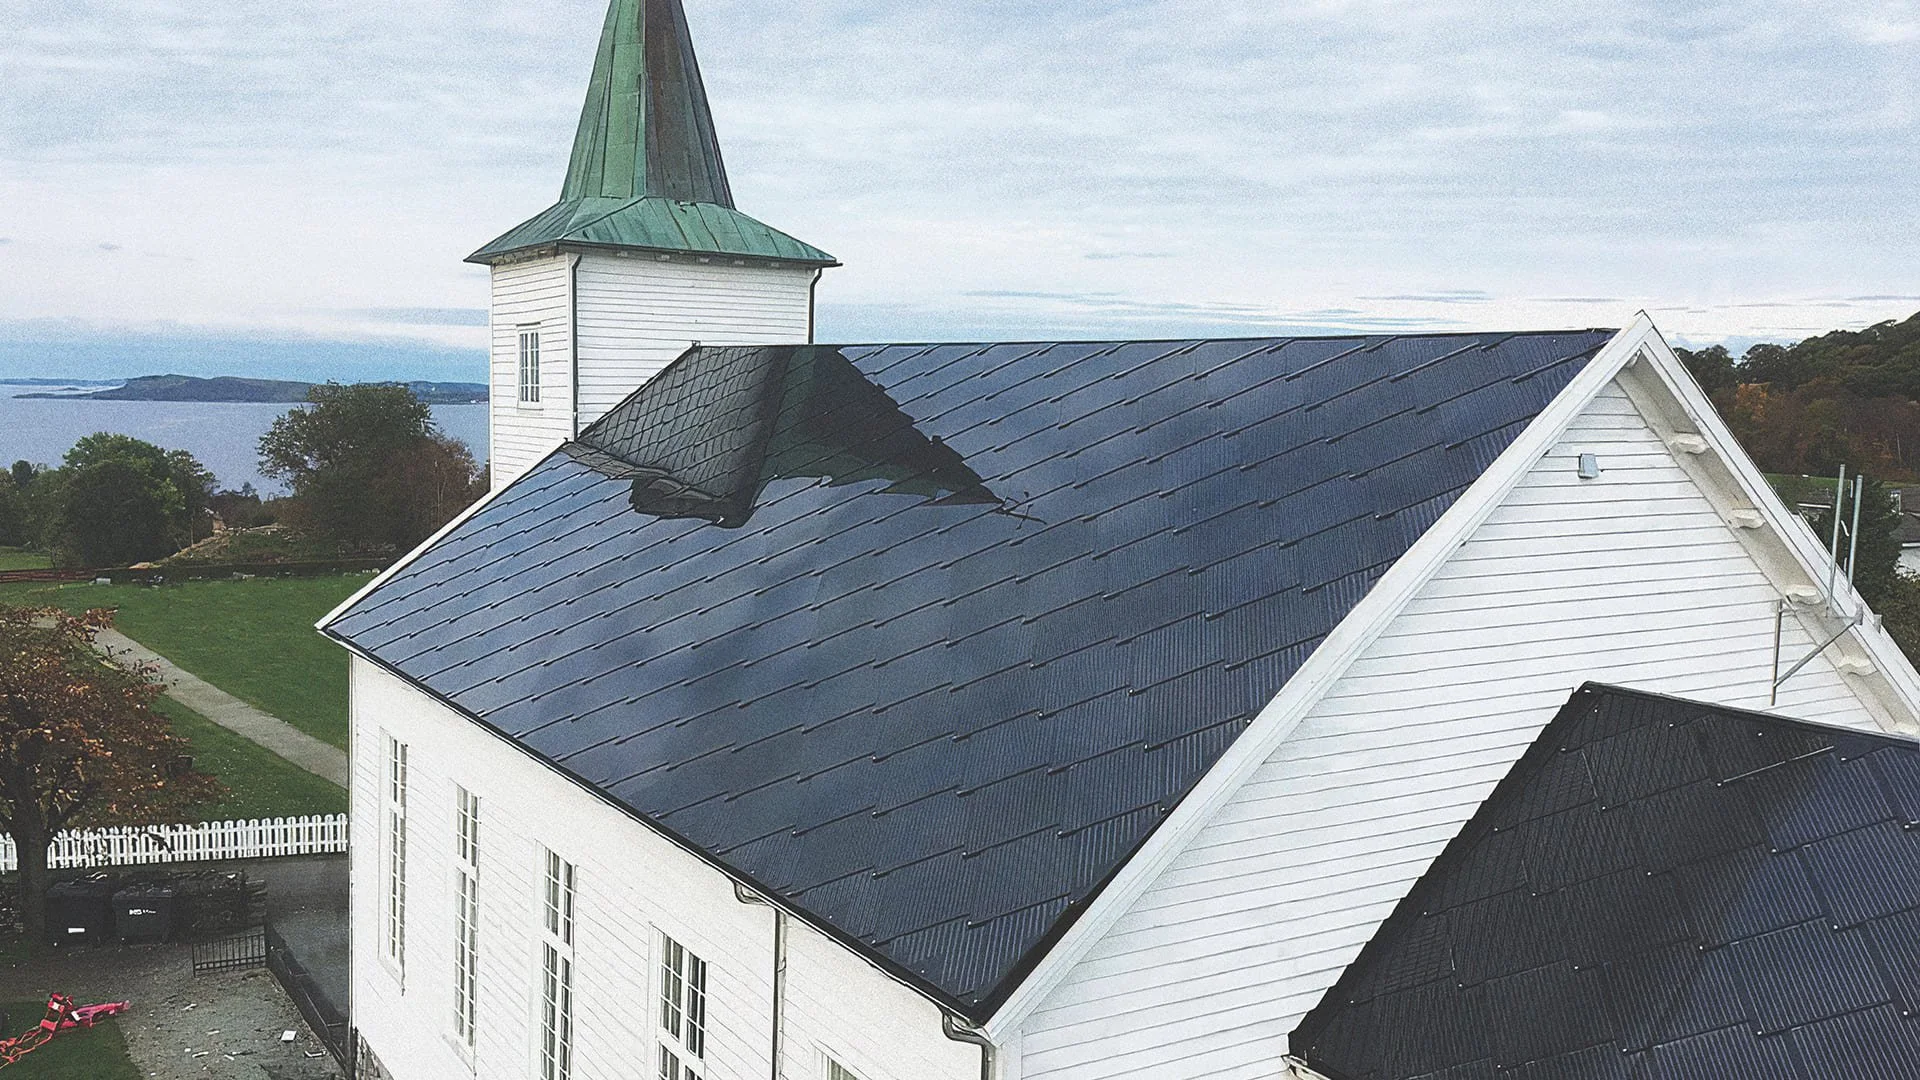 SunStyle solar tiles on a renovated historic church roof in Norway